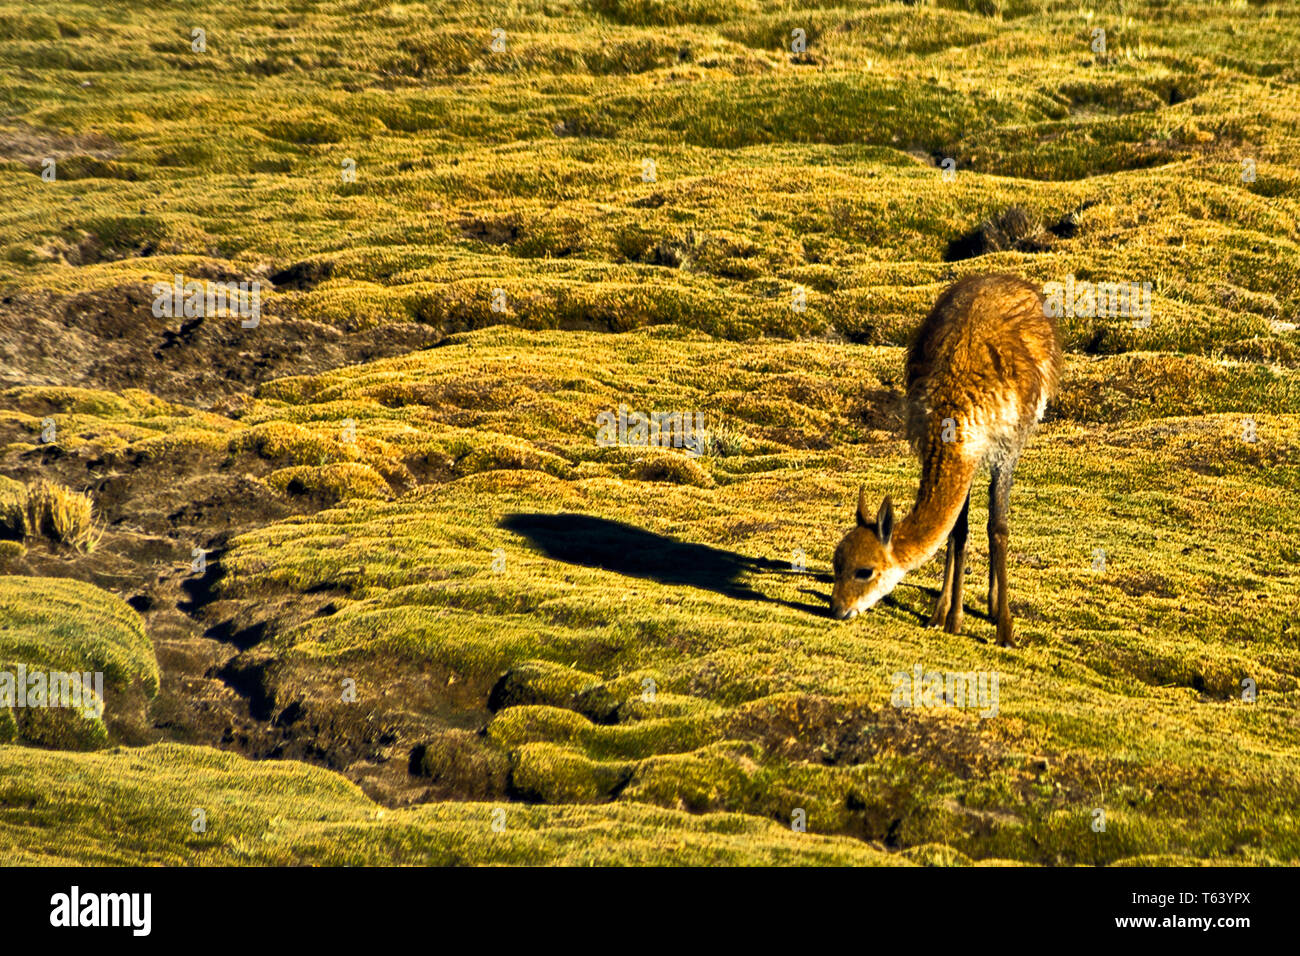 Vicuña grazing on partly frozen short vegetation derived from snow melt due to the altitude,some 4300 meteres above sea level. Stock Photo